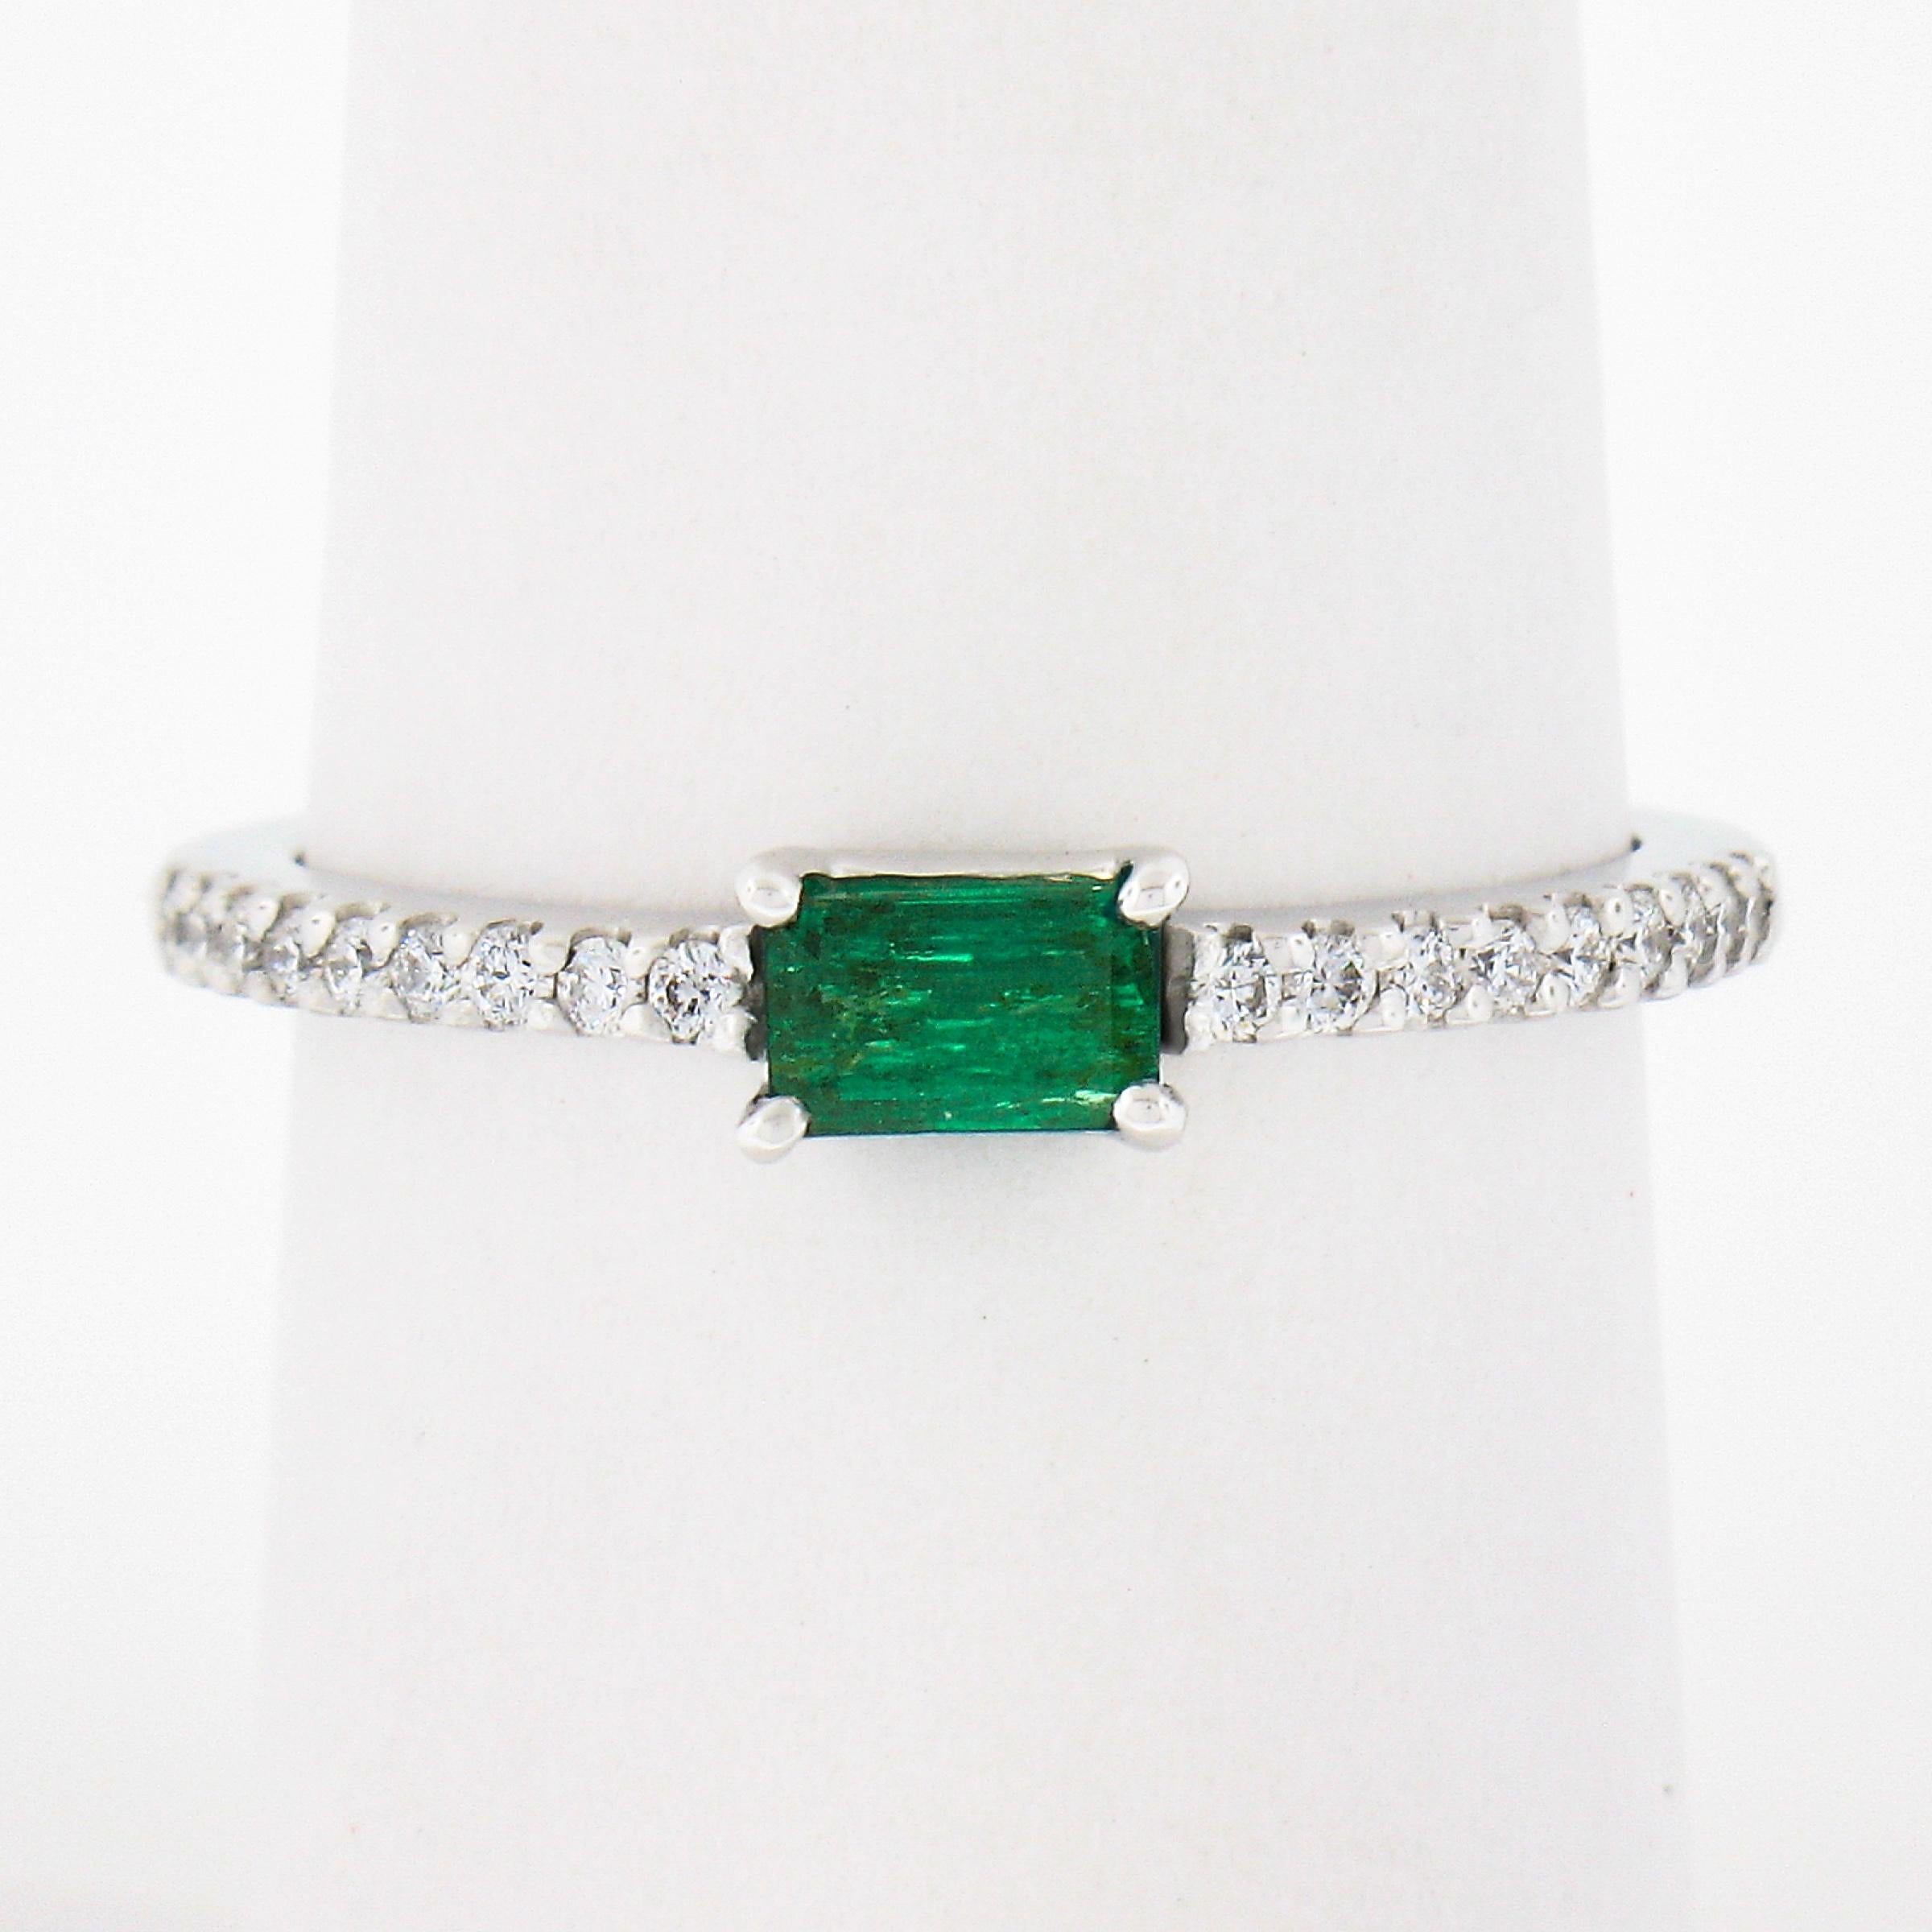 A simple yet gorgeous, emerald solitaire ring that is newly crafted from solid 14k white gold. The solitaire is elongated rectangular step cut with a nice and rich green color accented with 18 diamonds that are all set in prongs settings. This